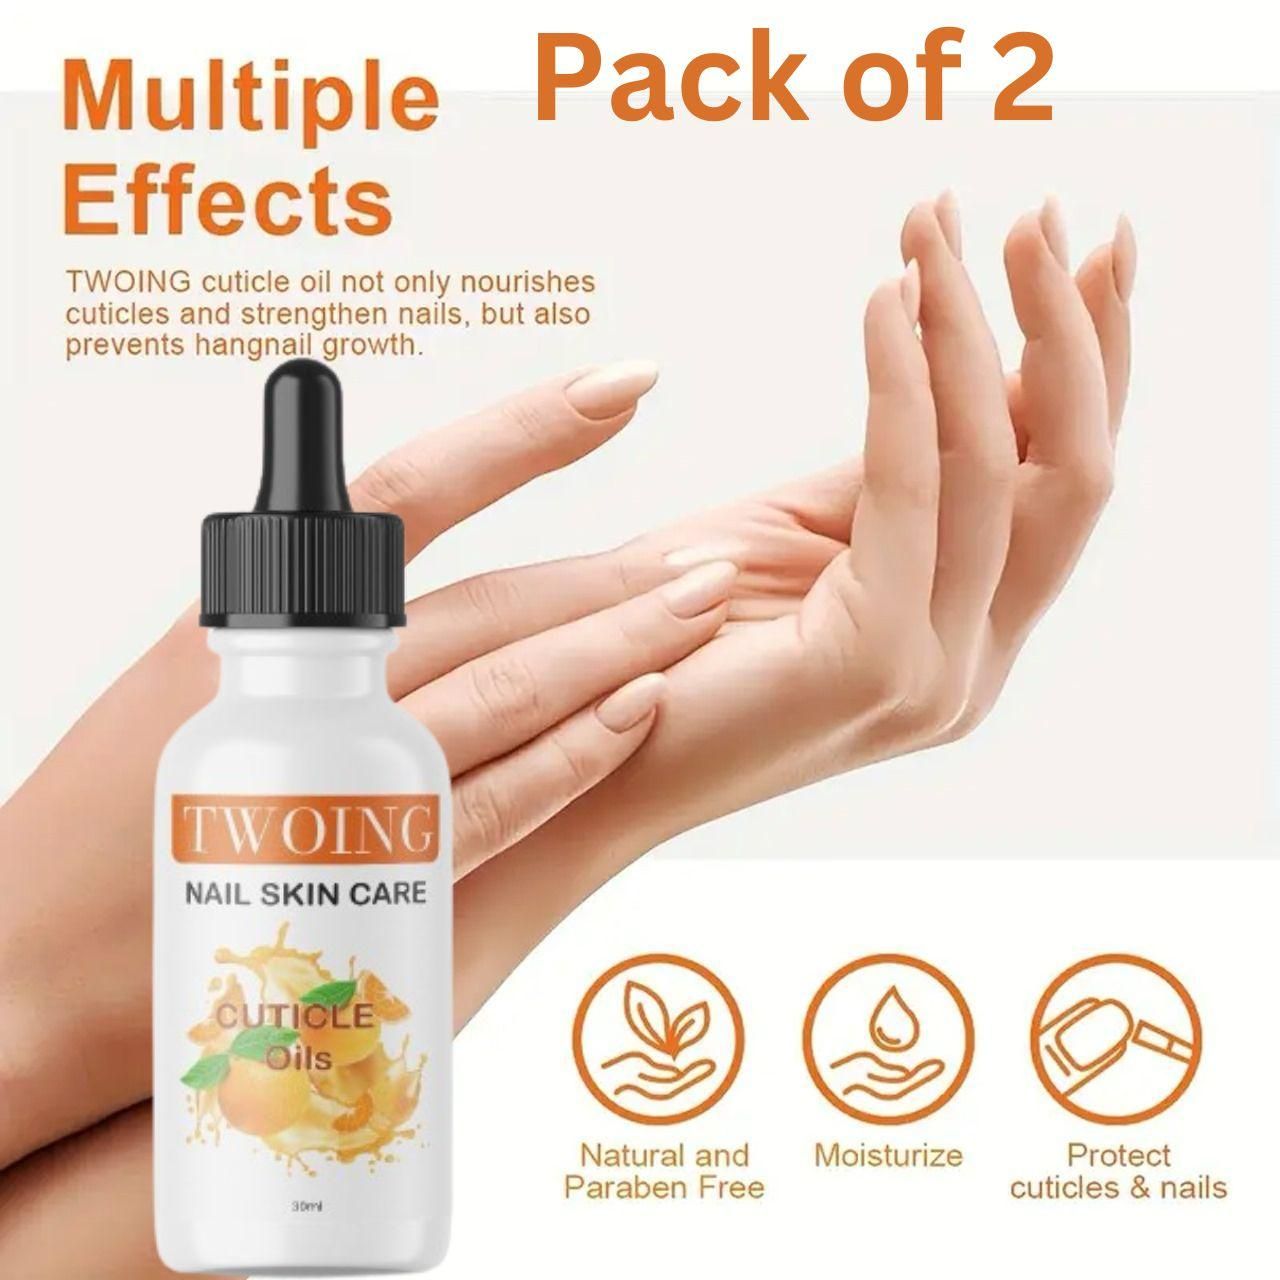 Twoing Nail Skin Care Cuticle Oils 30ml - Nourishing Elixir for Beautiful Nails (Pack Of 2)